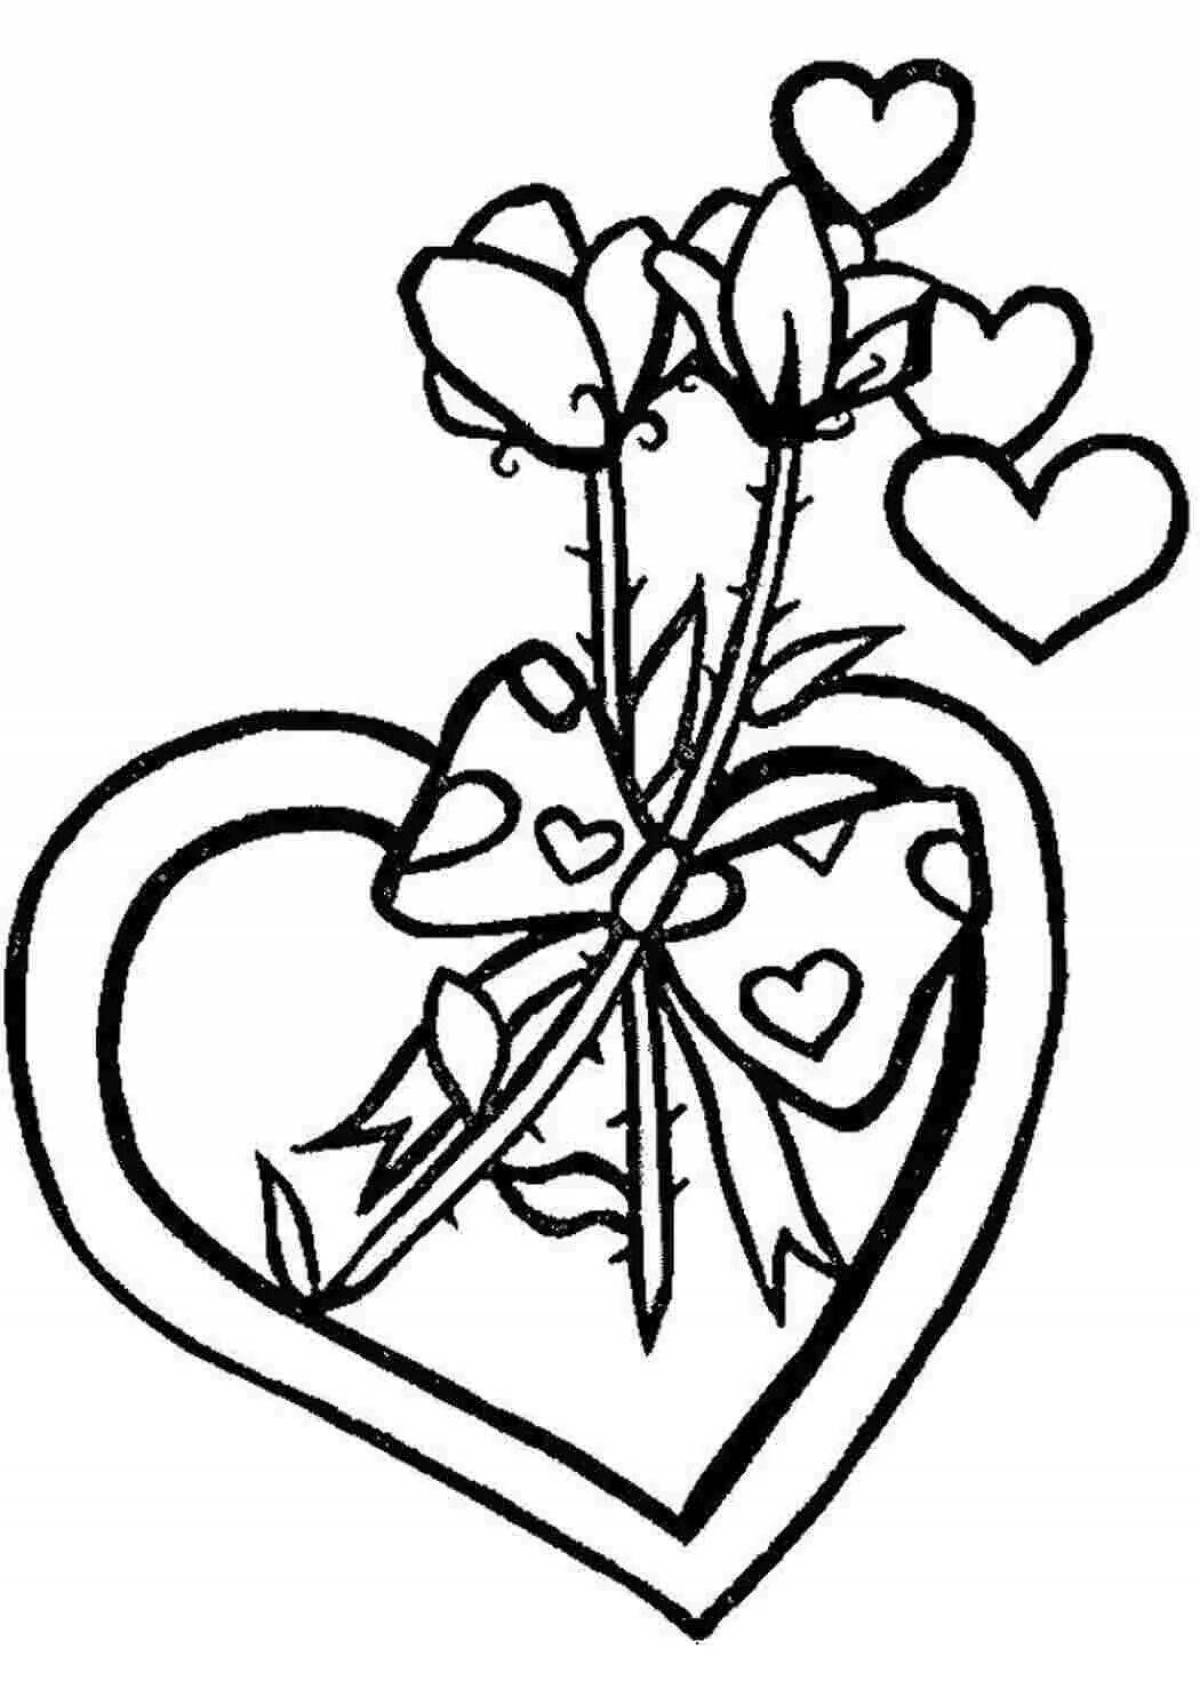 Amazing mom heart coloring page